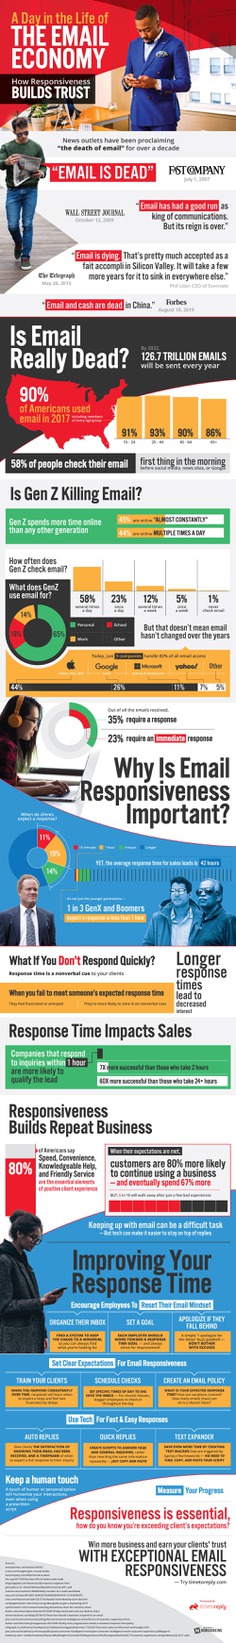 Time is money, so prompt email replies are the way to go. Here's how you can improve your response time today.